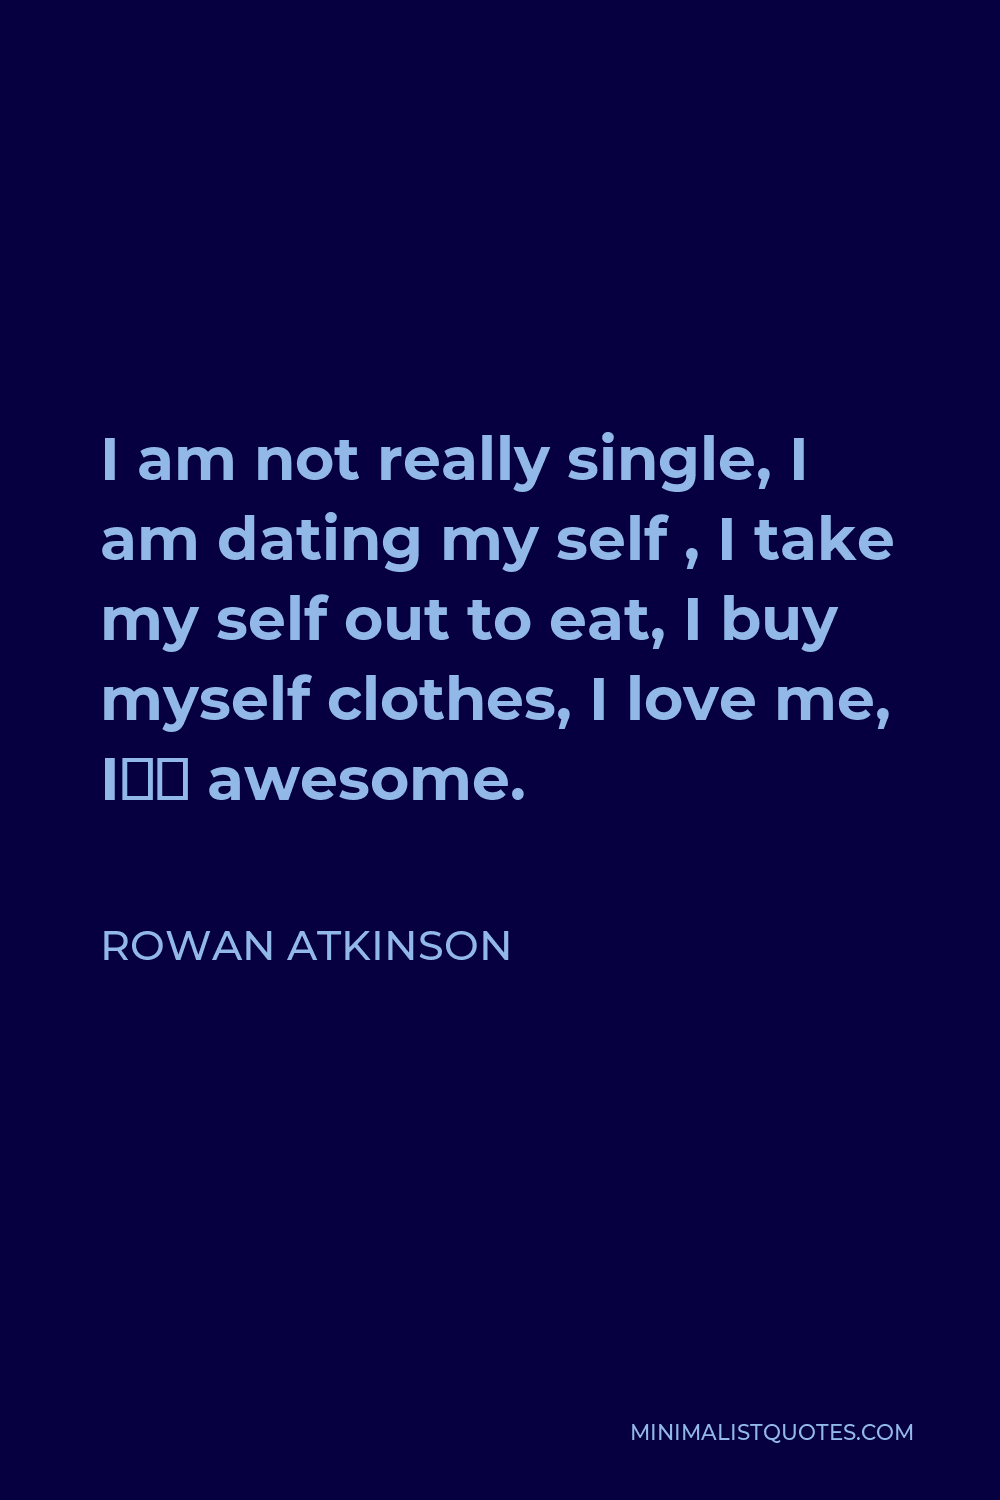 Rowan Atkinson Quote - I am not really single, I am dating my self , I take my self out to eat, I buy myself clothes, I love me, I’m awesome.